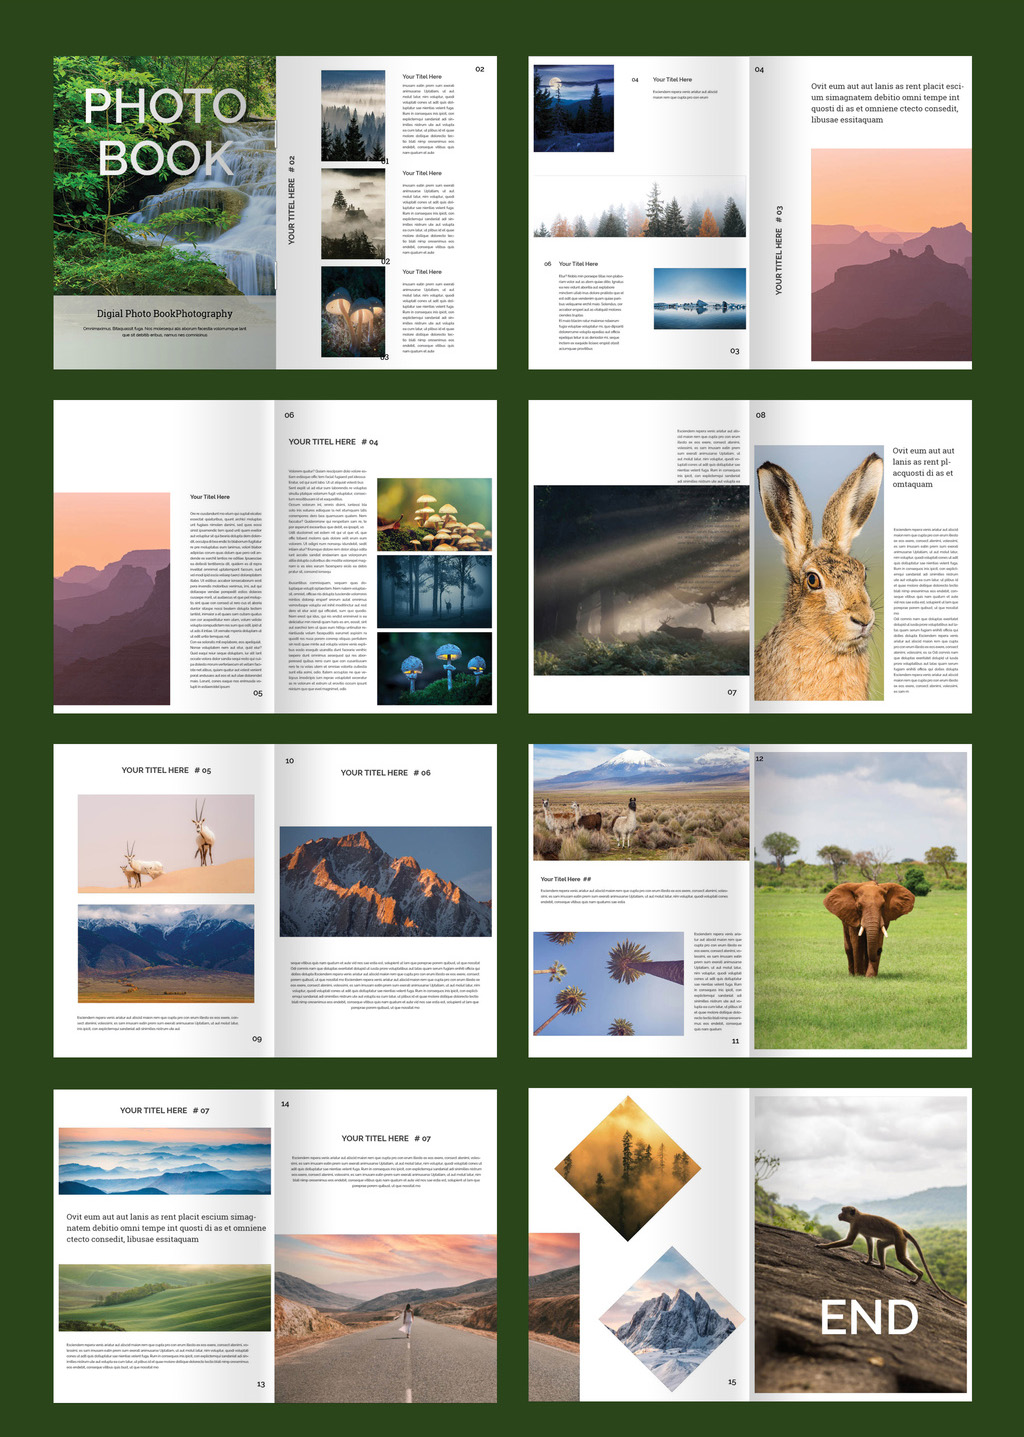 Free Photo Book Template for Adobe InDesign (INDD format)